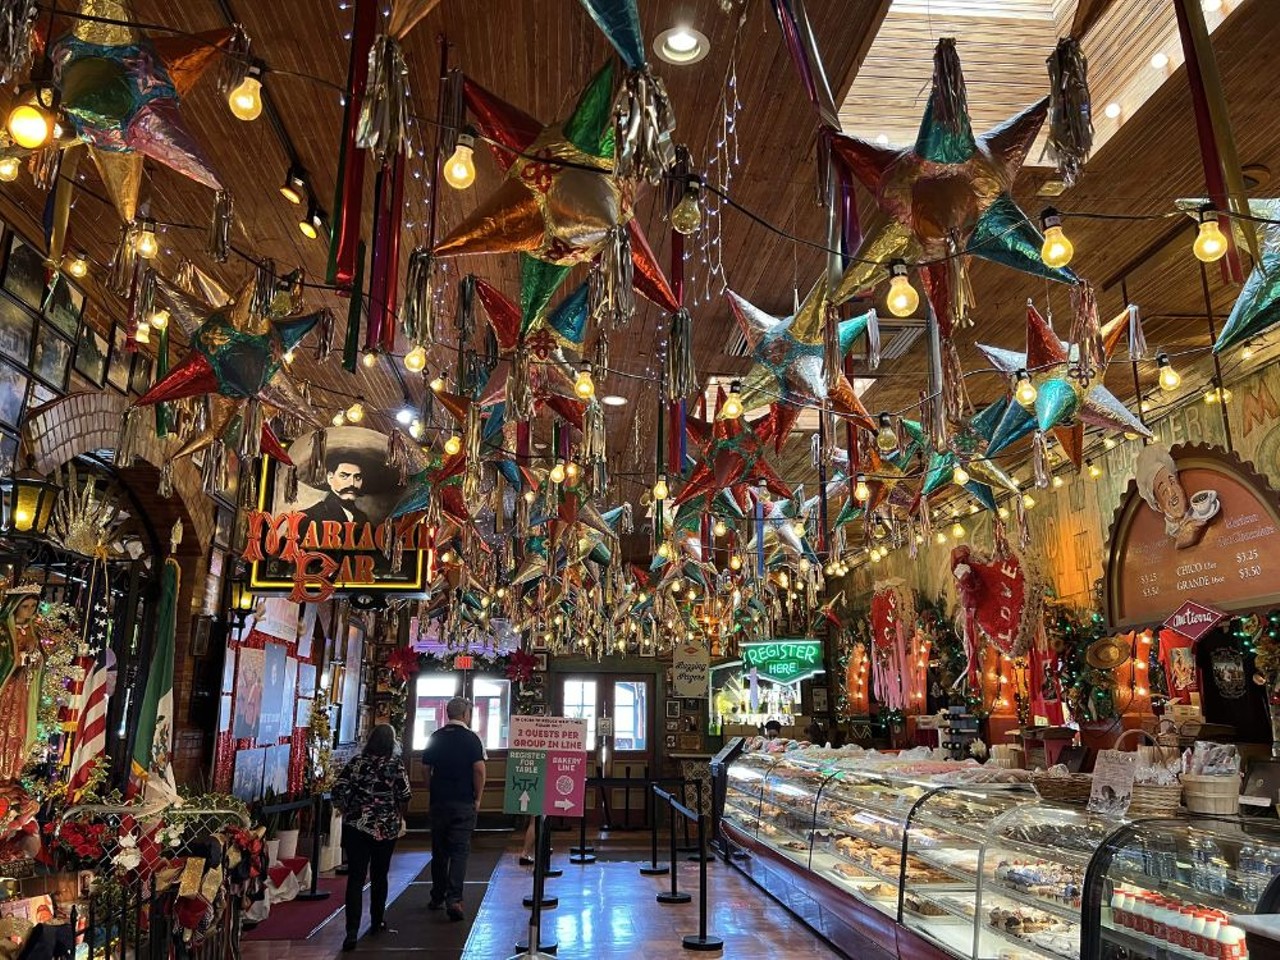 Mi Tierra
218 Produce Row, (210) 225-1262, https://lafamiliacortez.com/mi-tierra
Pedro and Cruz Cortez founded this downtown landmark in 1941, and it's since grown from a three-table cafe to world-famous bastion of Tex-Mex cuisine. Locals and tourists alike can break bread over breakfast, lunch and dinner at Mi Tierra.